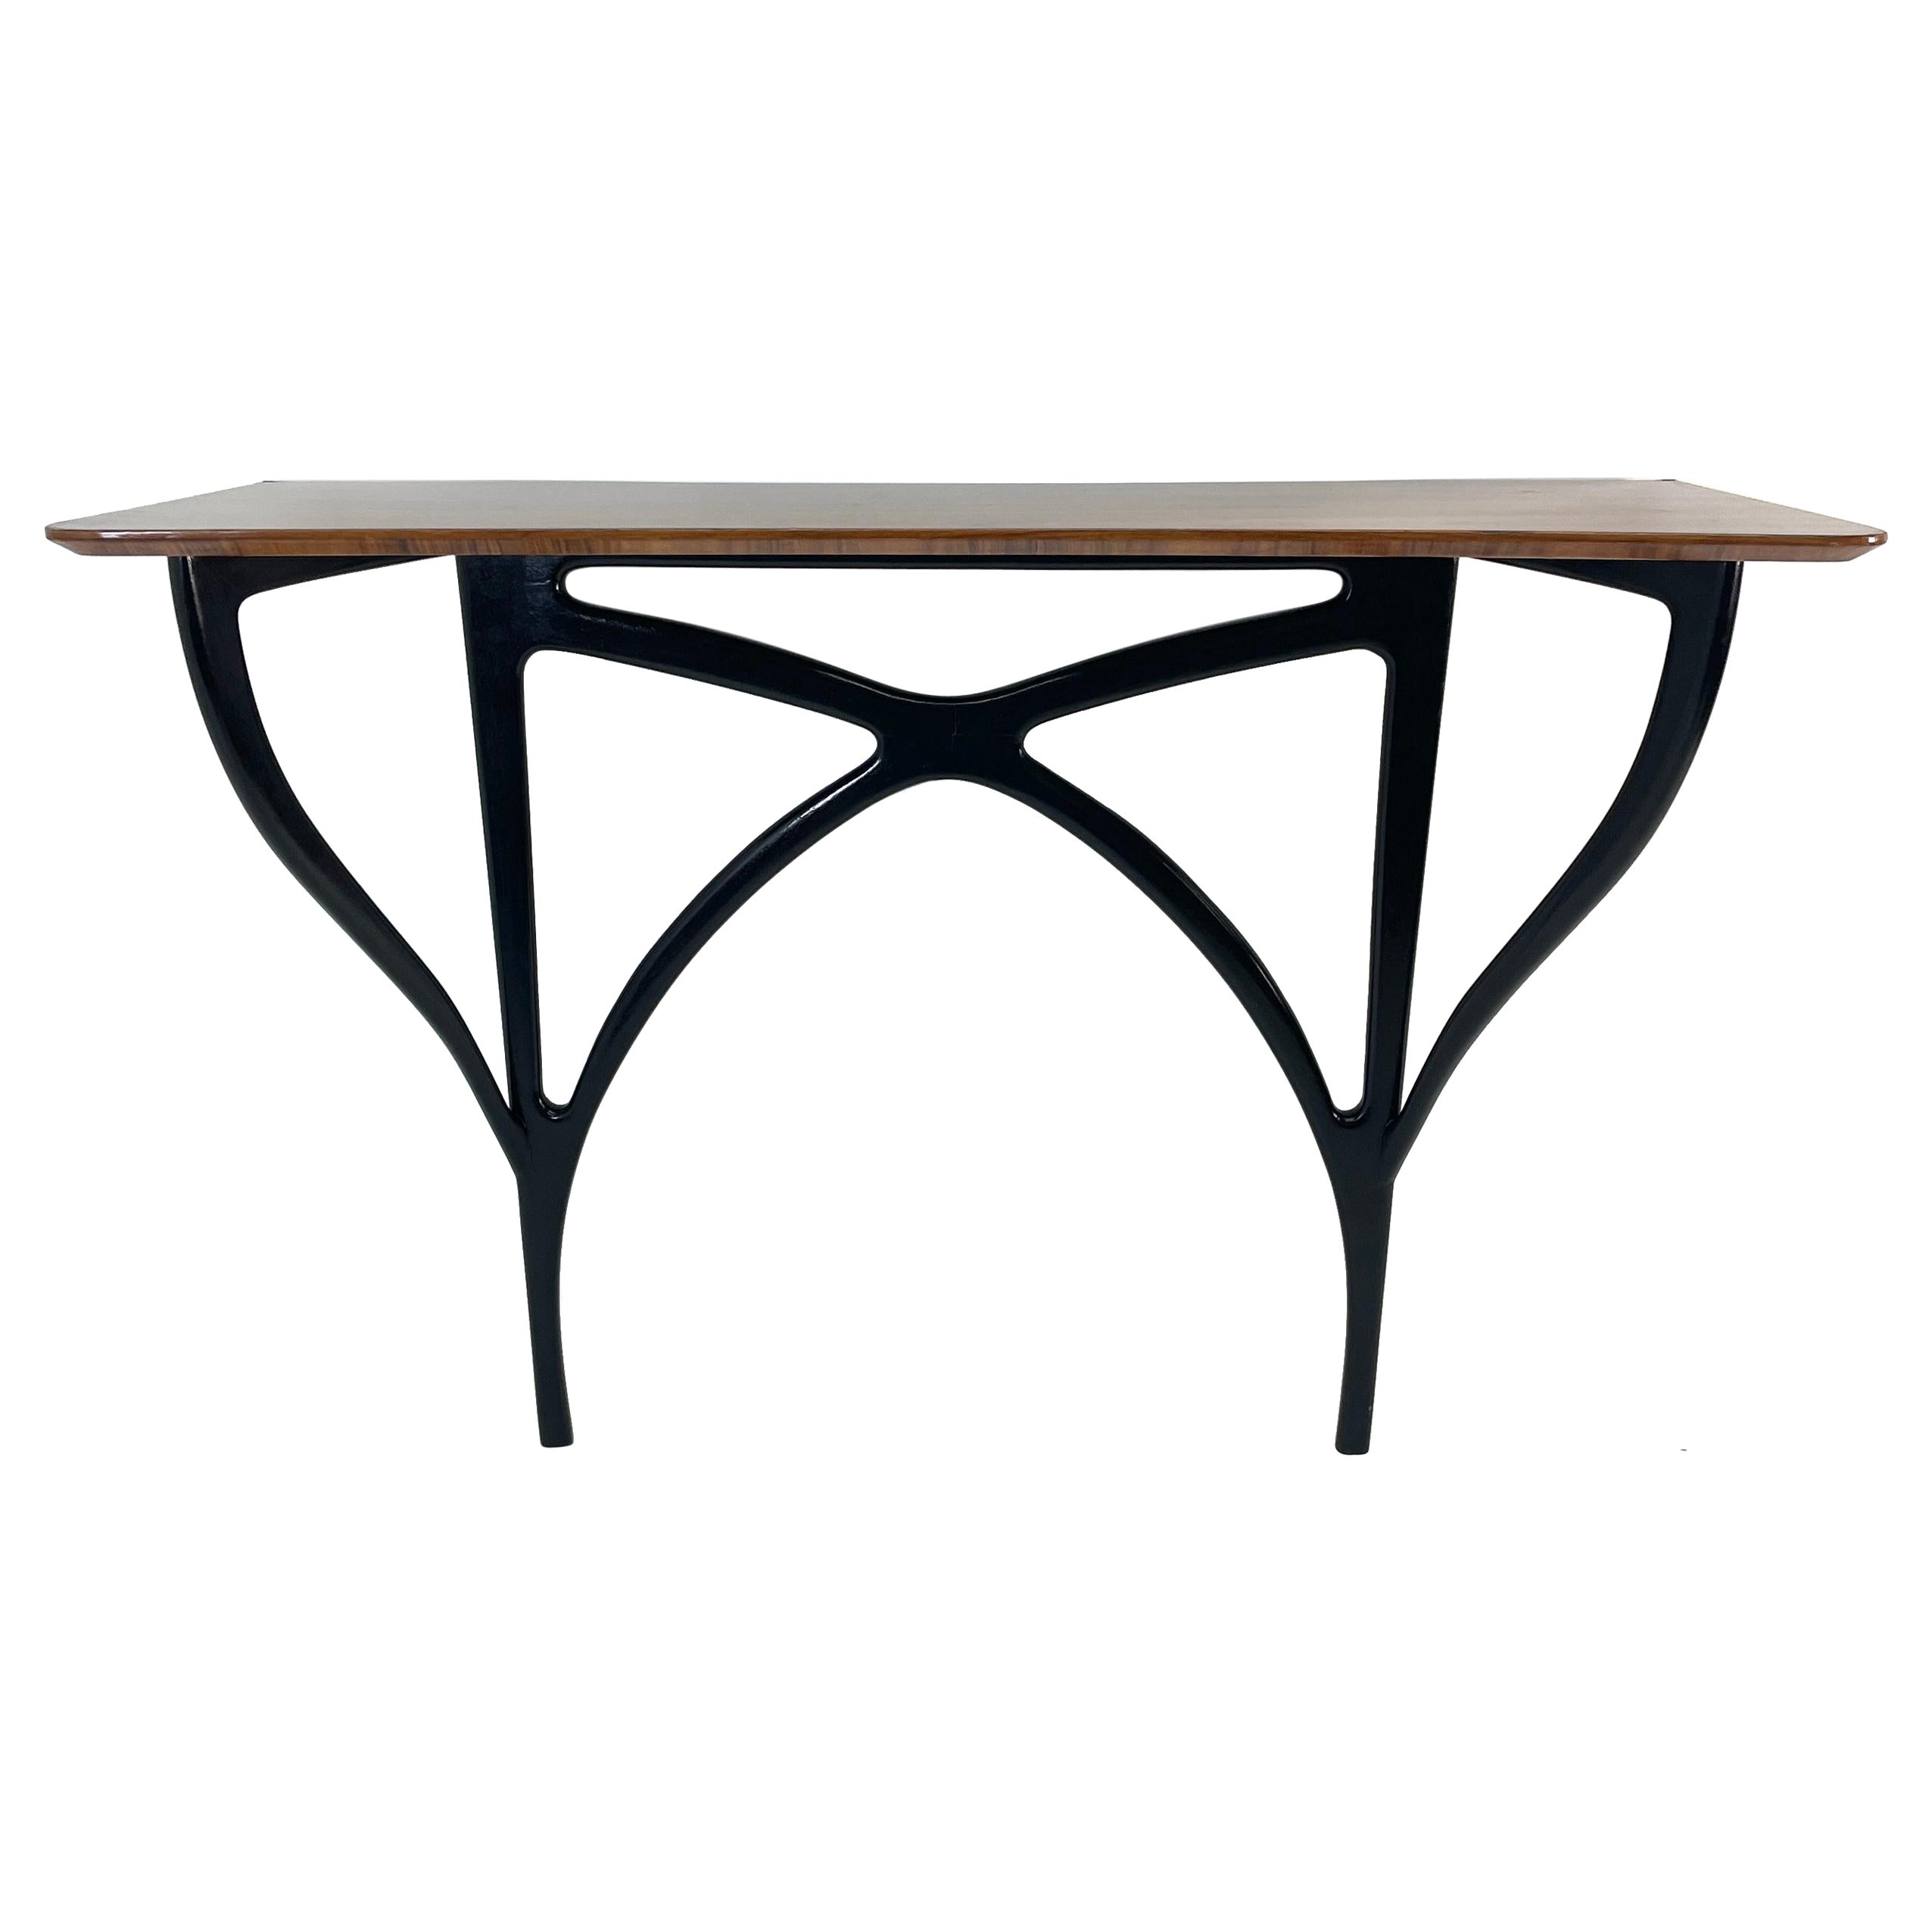 Ico Parisi Wall-mounted console table from Italy.